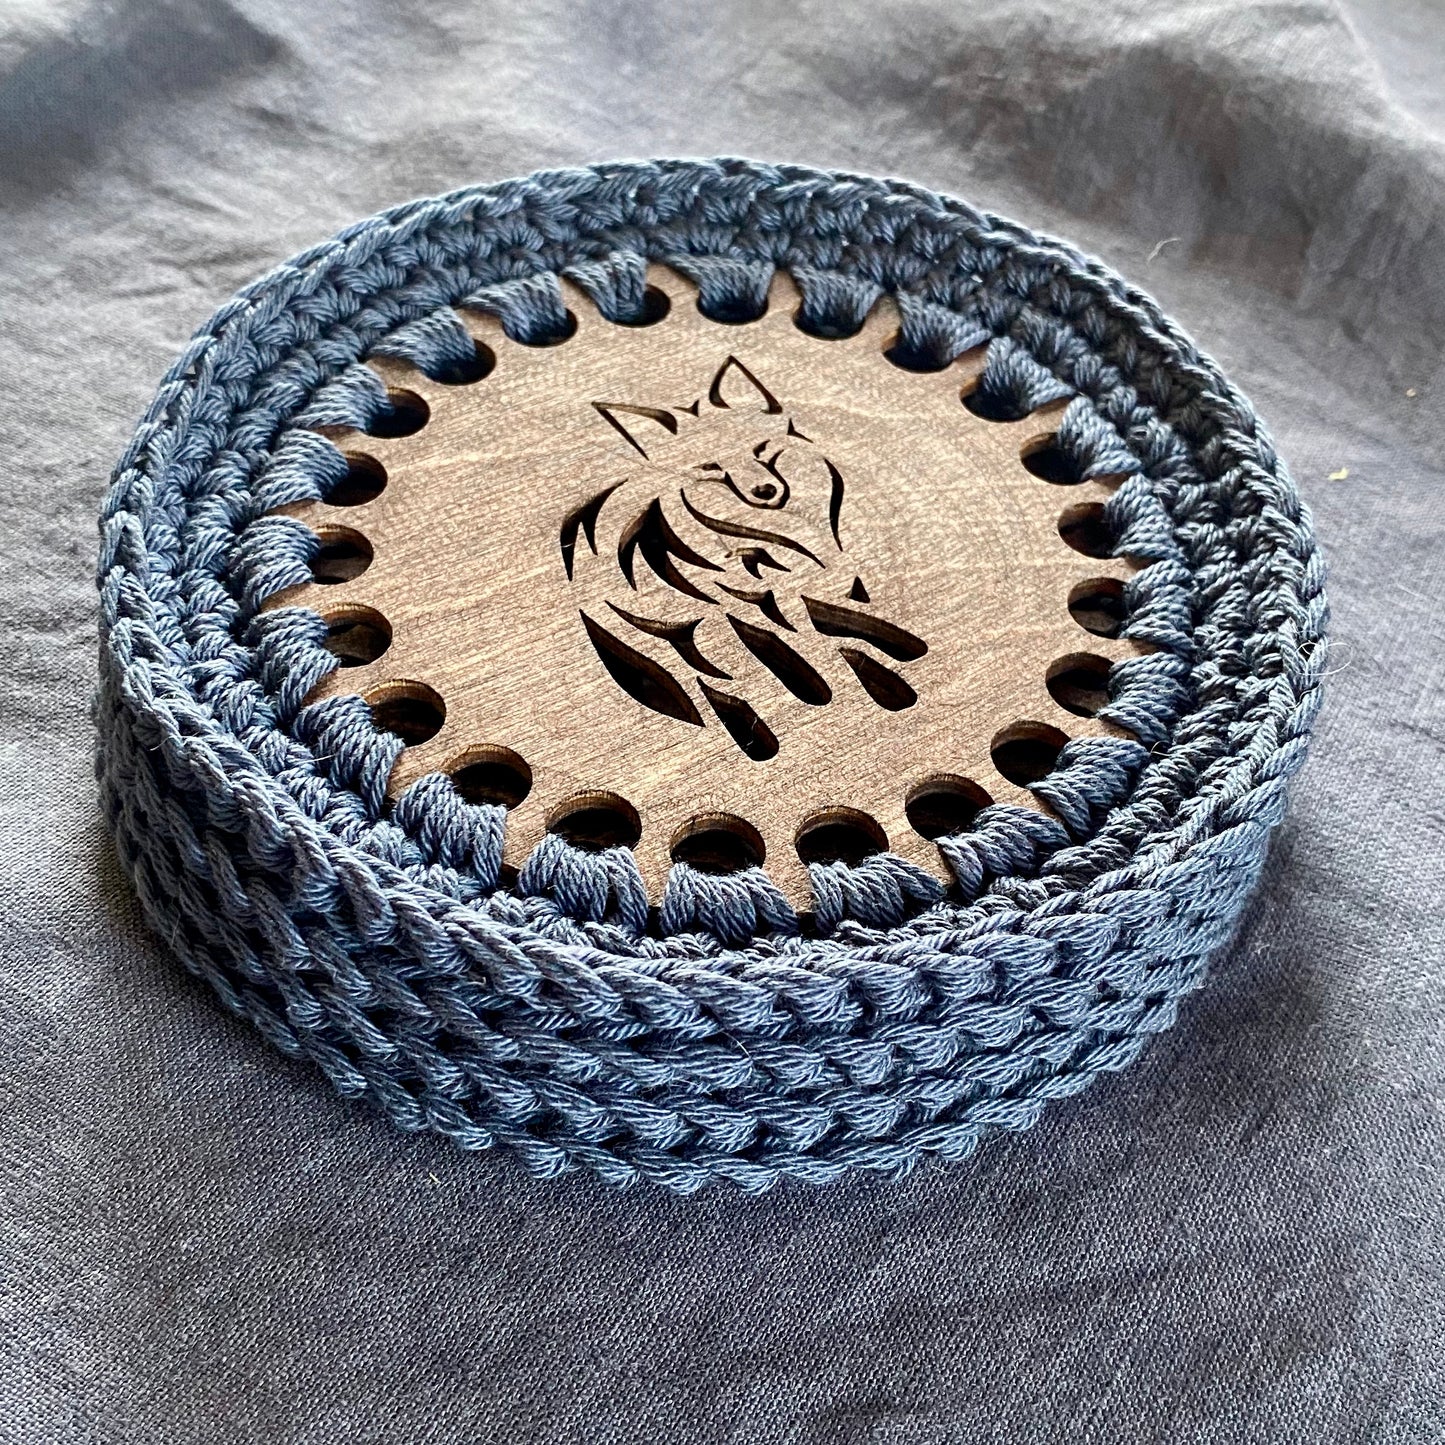 Coasters with Crochet Edge for Wolf Lovers